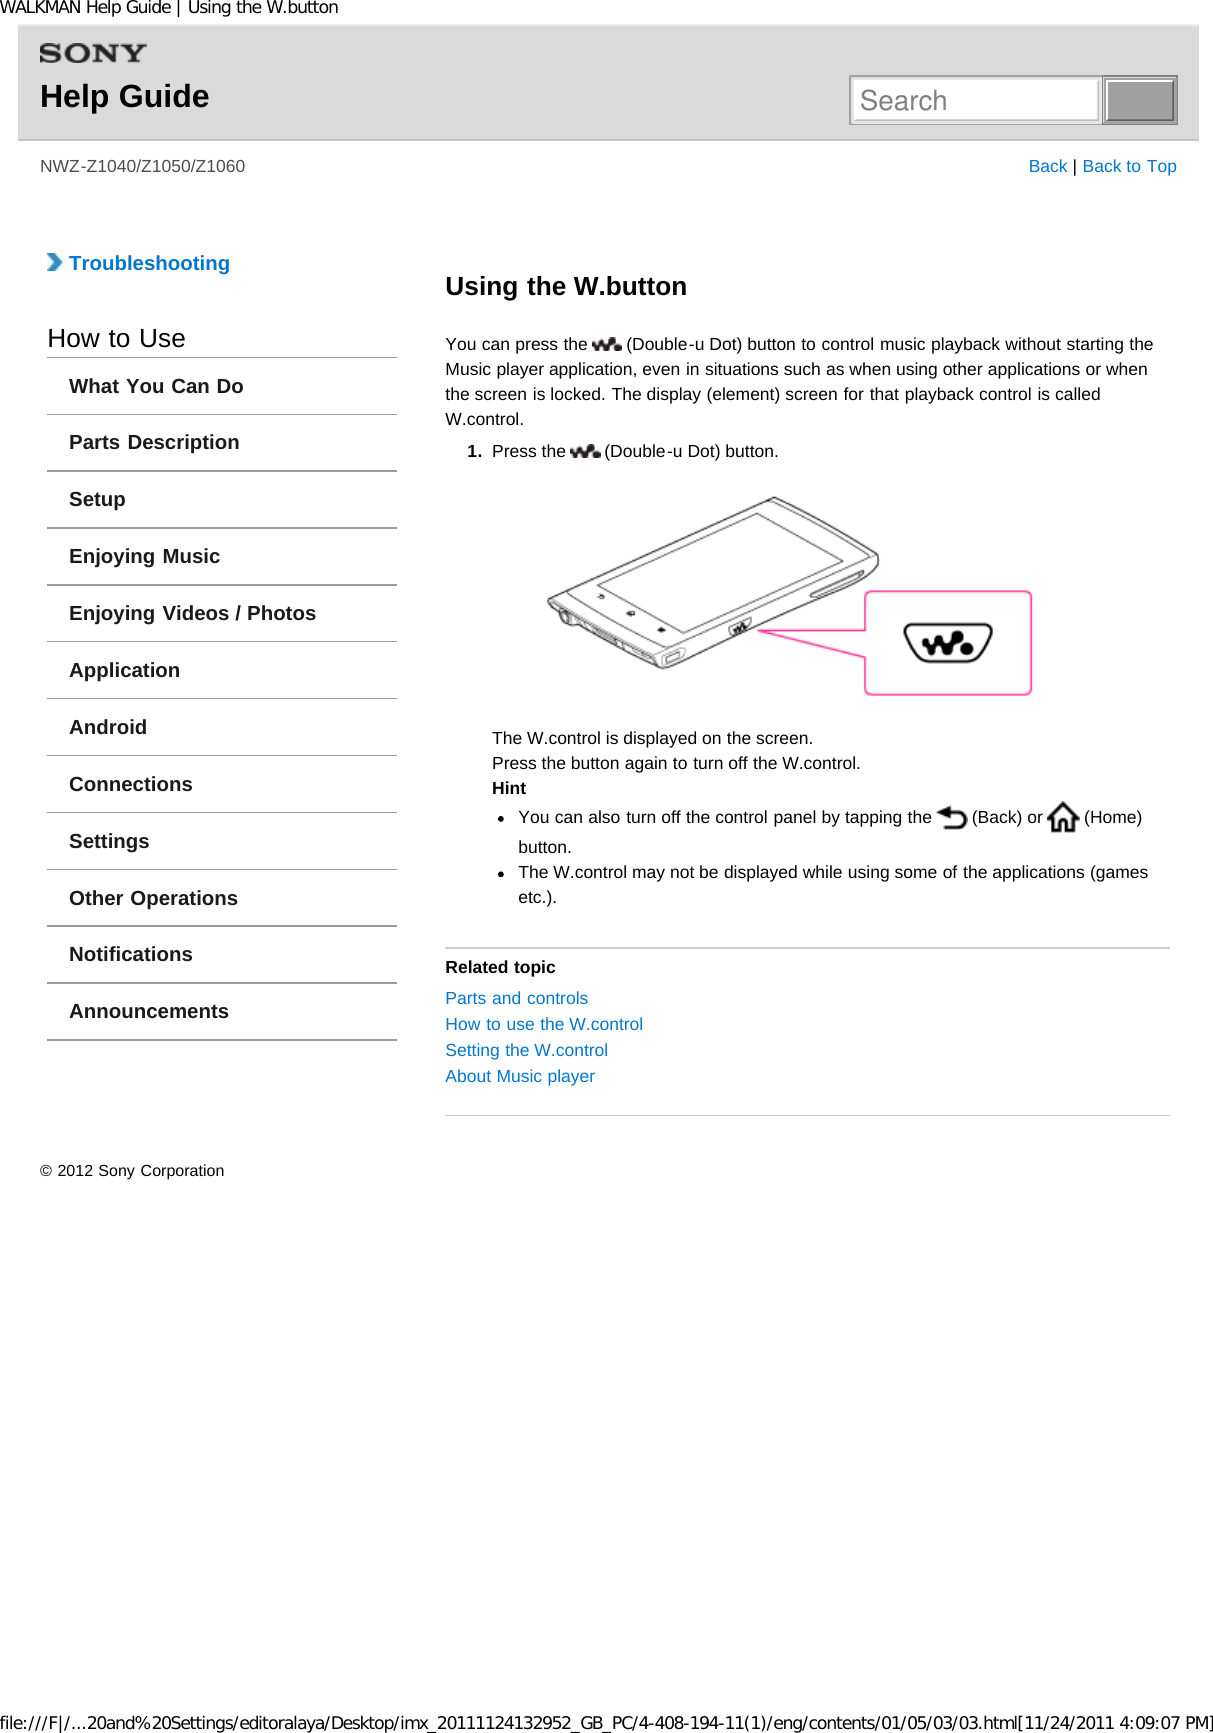 Page 197 of Sony Group NWZZ1000 Digital Media Player User Manual WALKMAN Help Guide   Top page